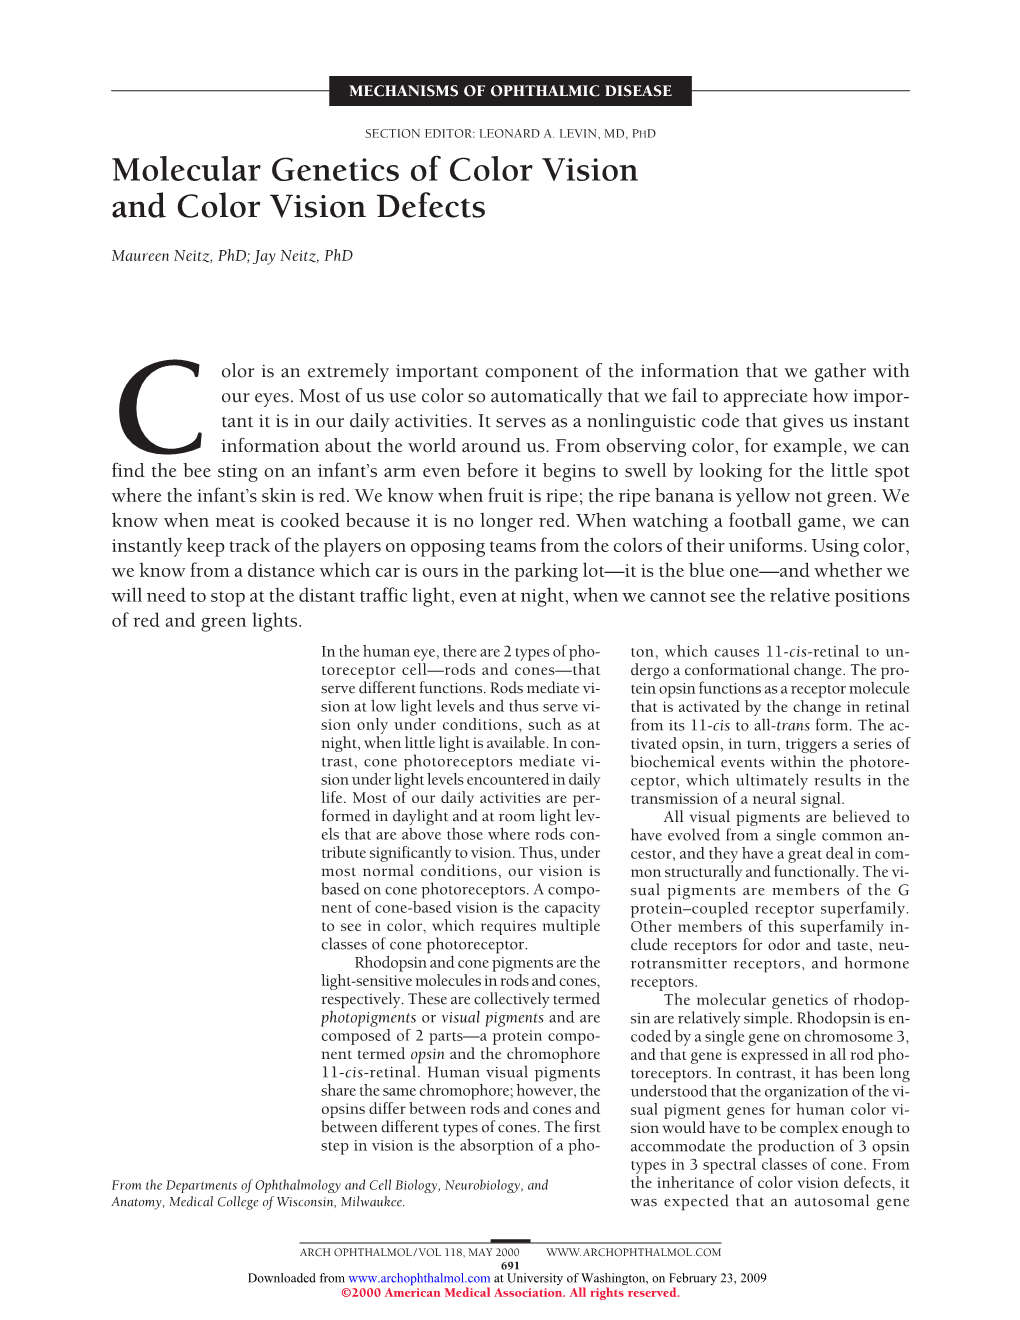 Molecular Genetics of Color Vision and Color Vision Defects